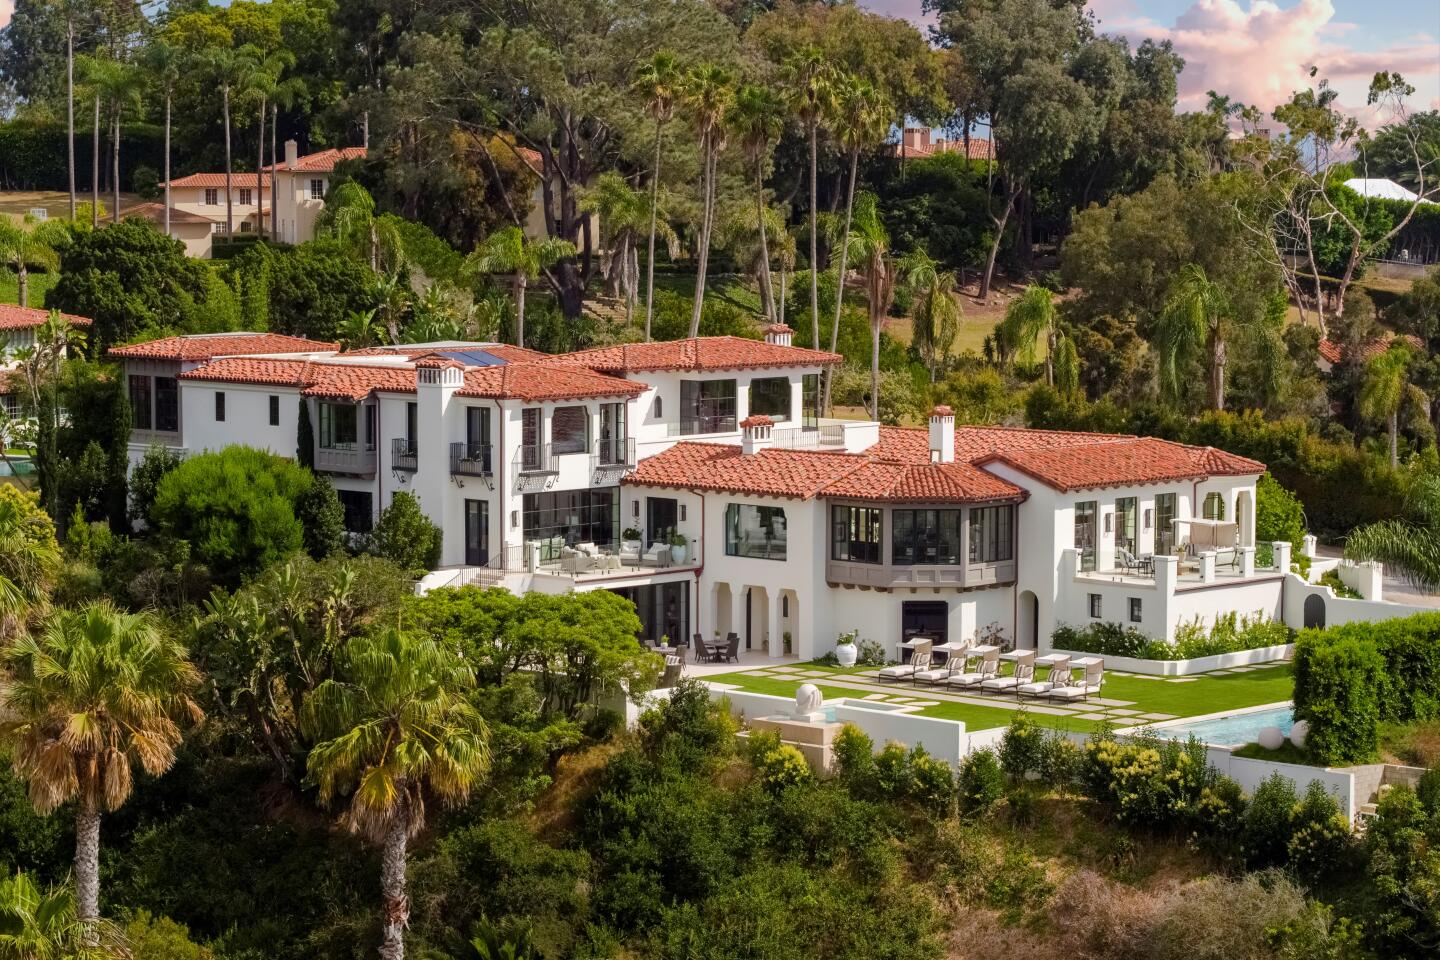 5 San Diego ZIP codes make the list of the nation's priciest - The